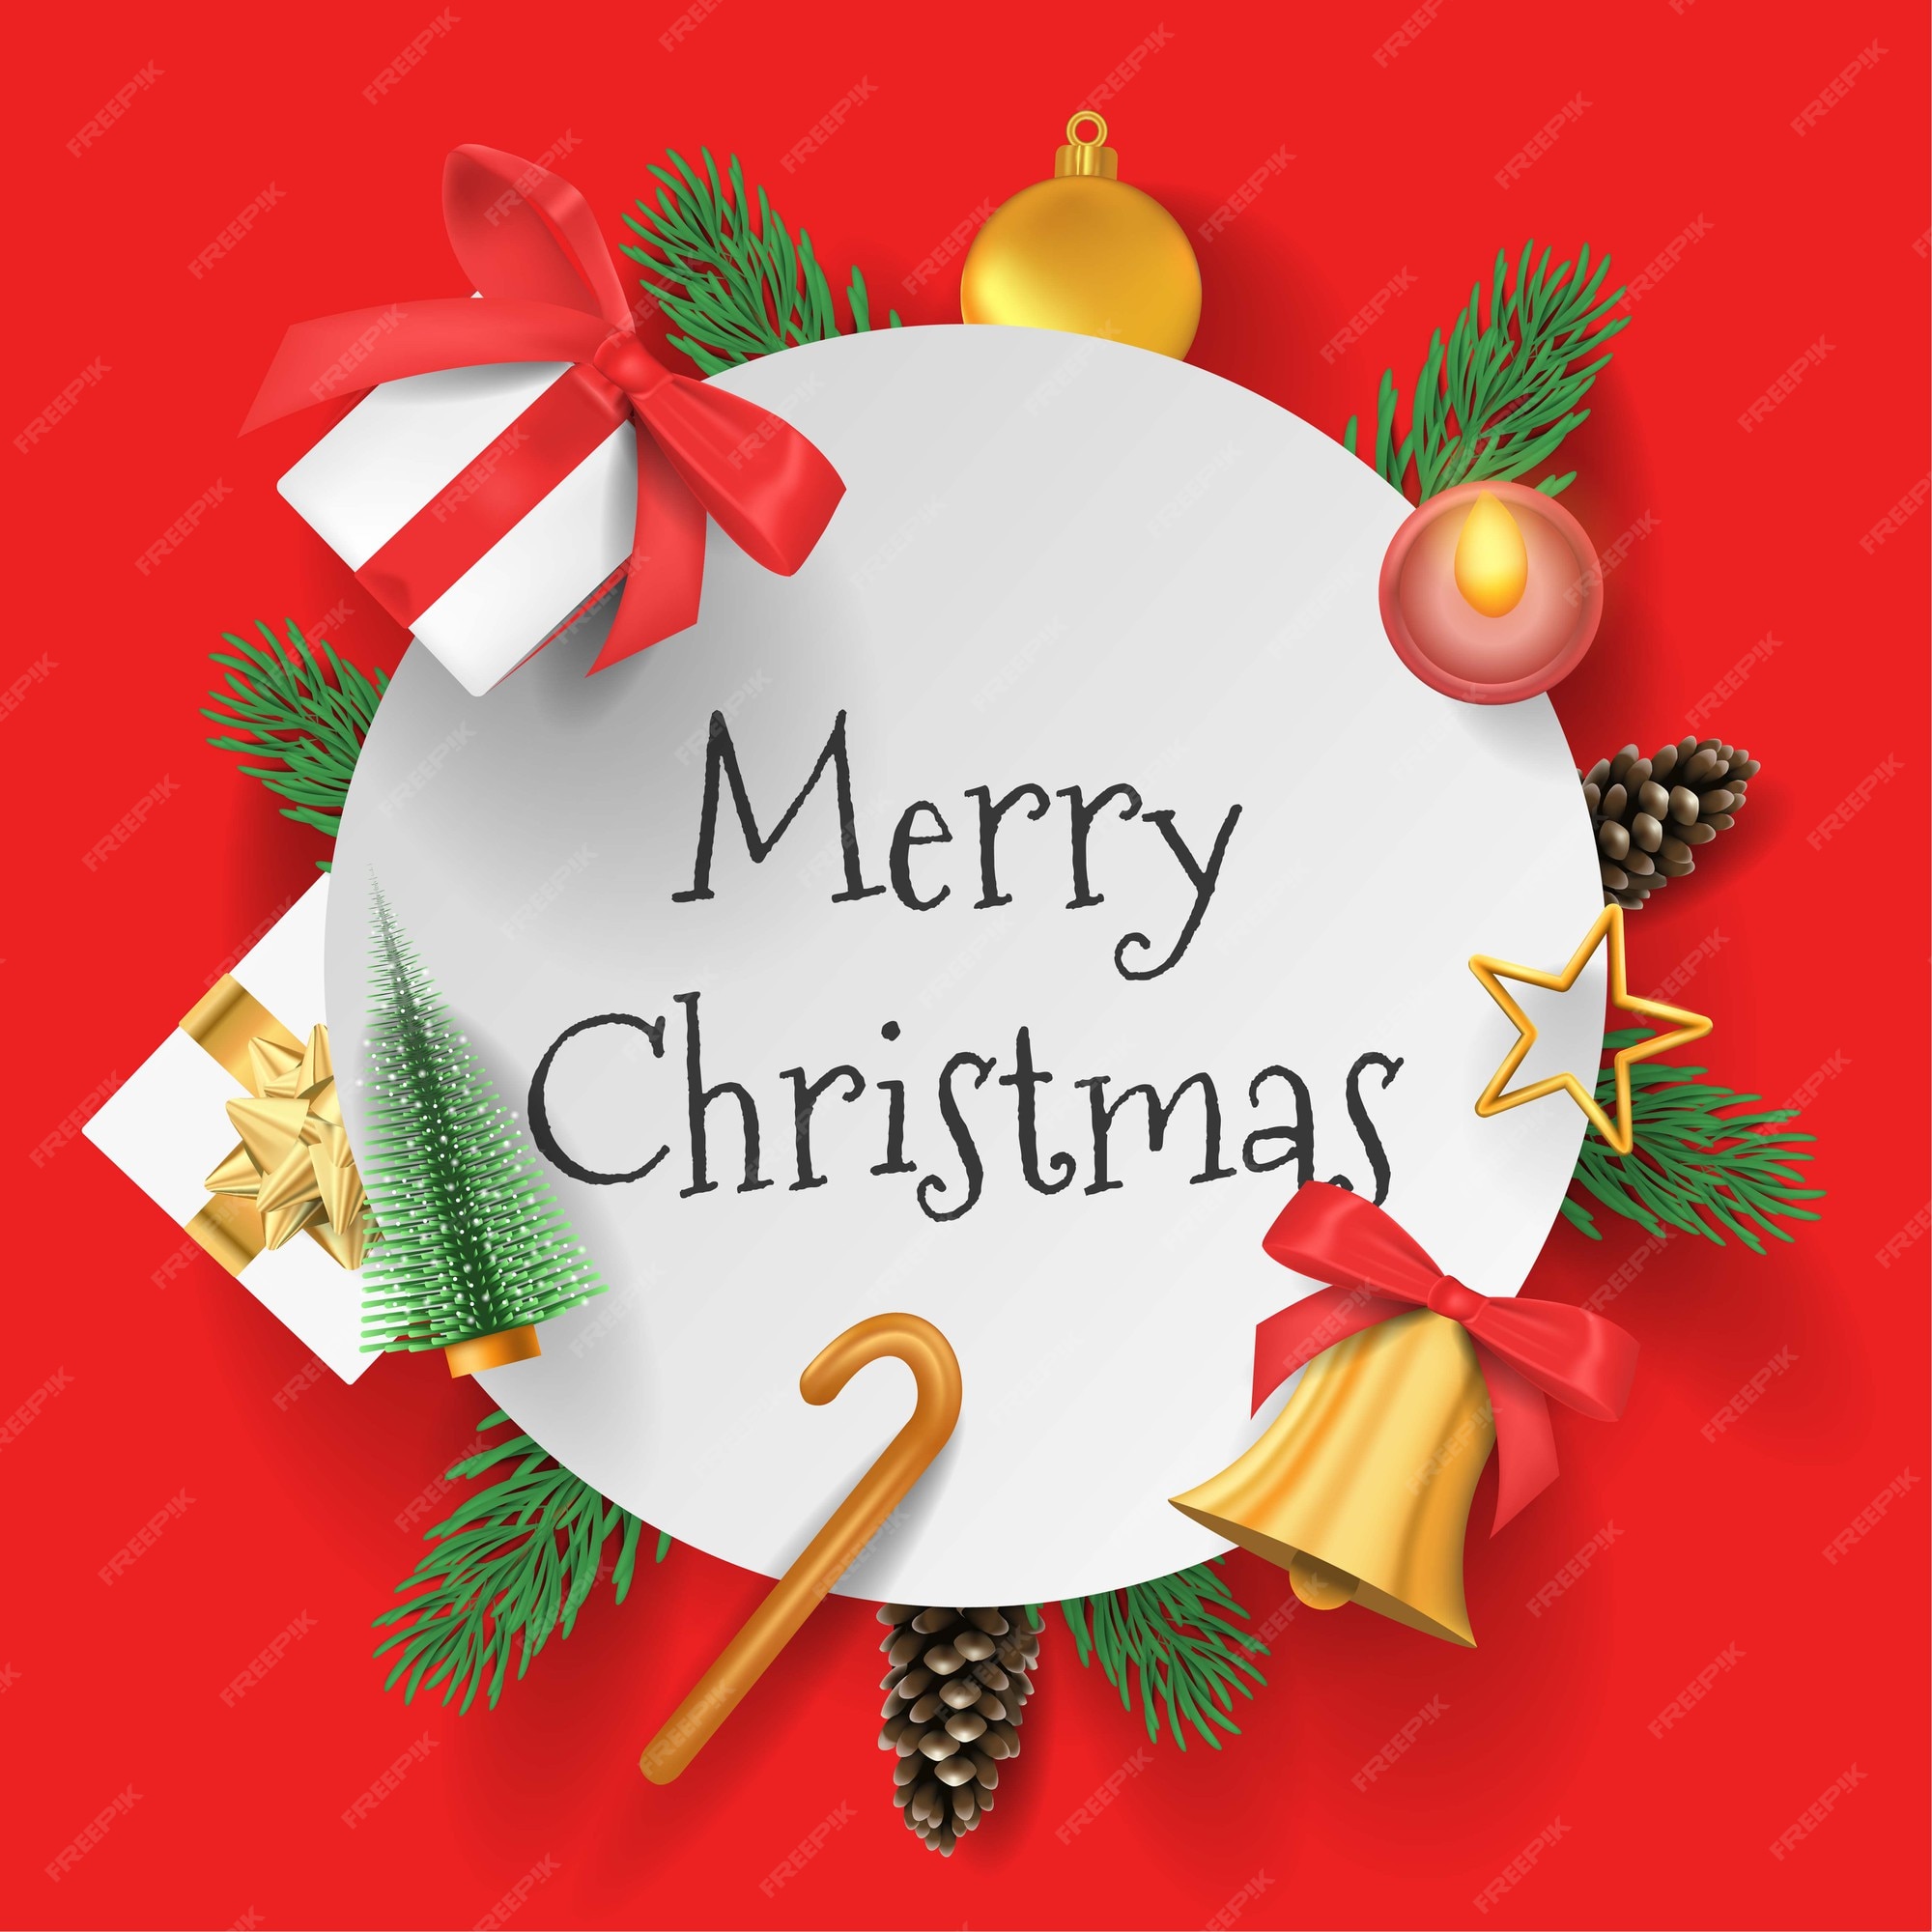 Premium Vector Merry christmas 3d red background